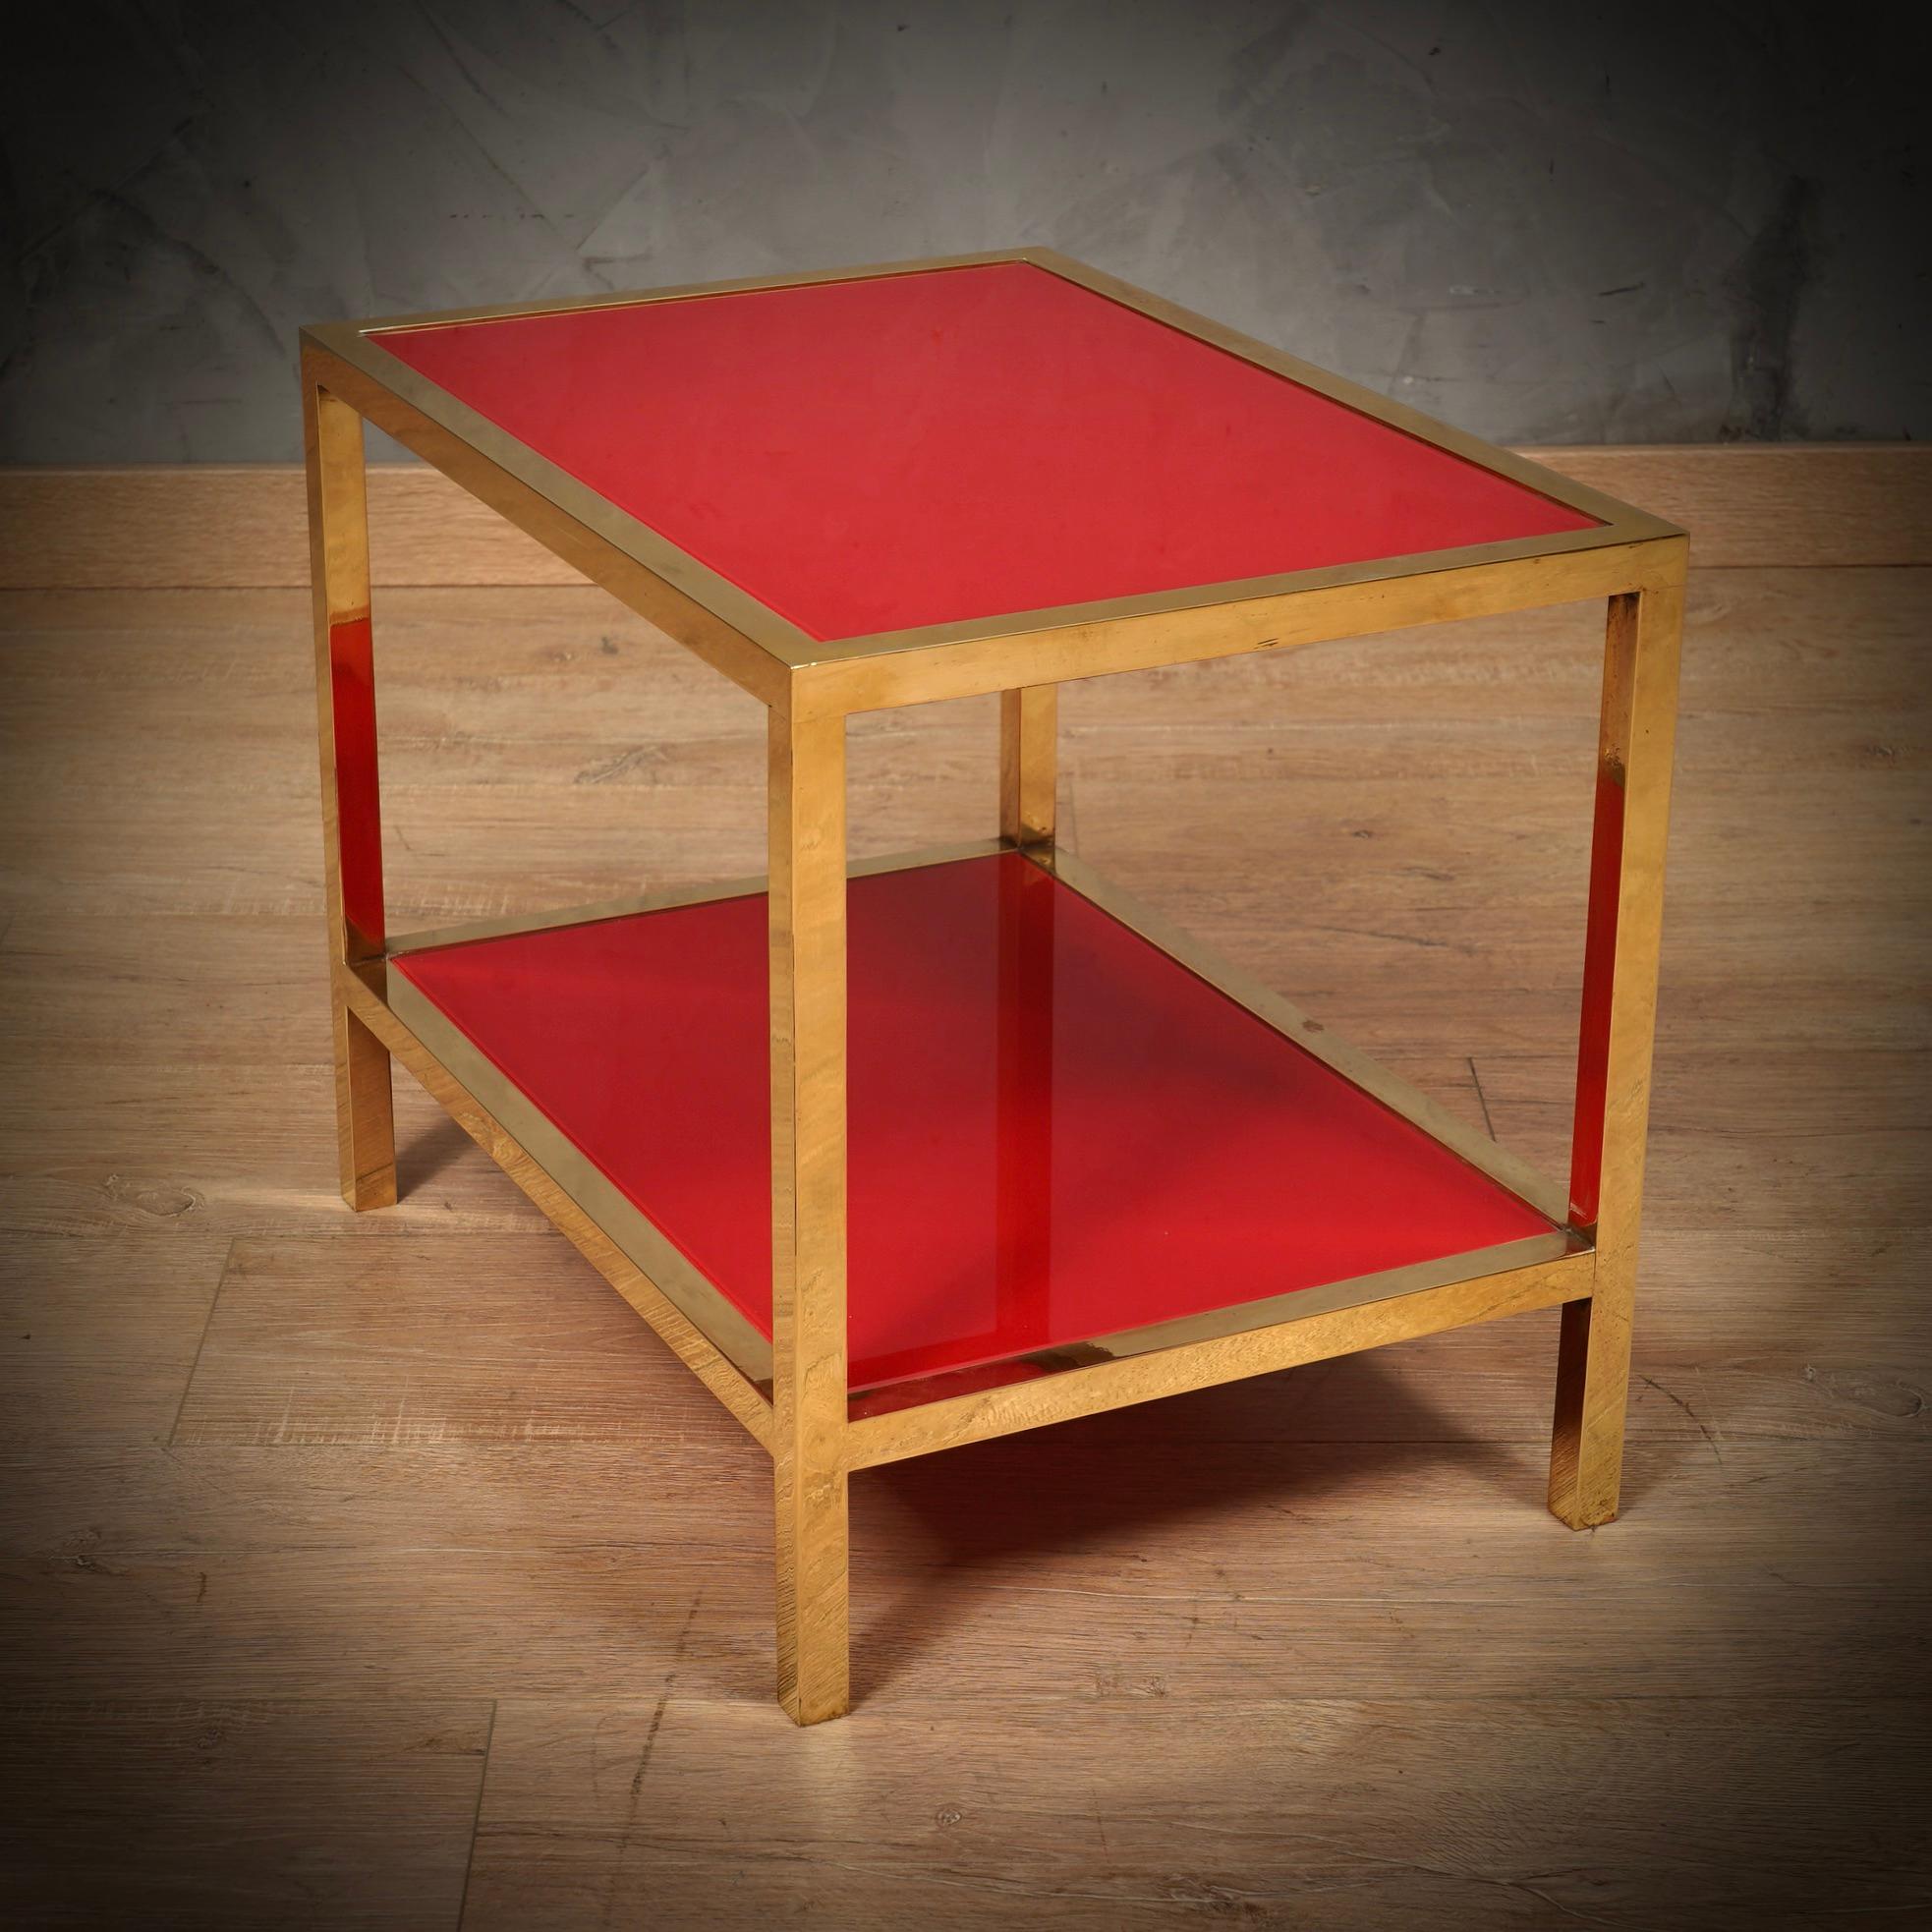 Exciting coffee tables in polished brass and red glass, linear but very elegant design, also due to the strong red colour. Simple but elegant workmanship for this coffee table, with thin legs and a beautiful color projecting it into a refined